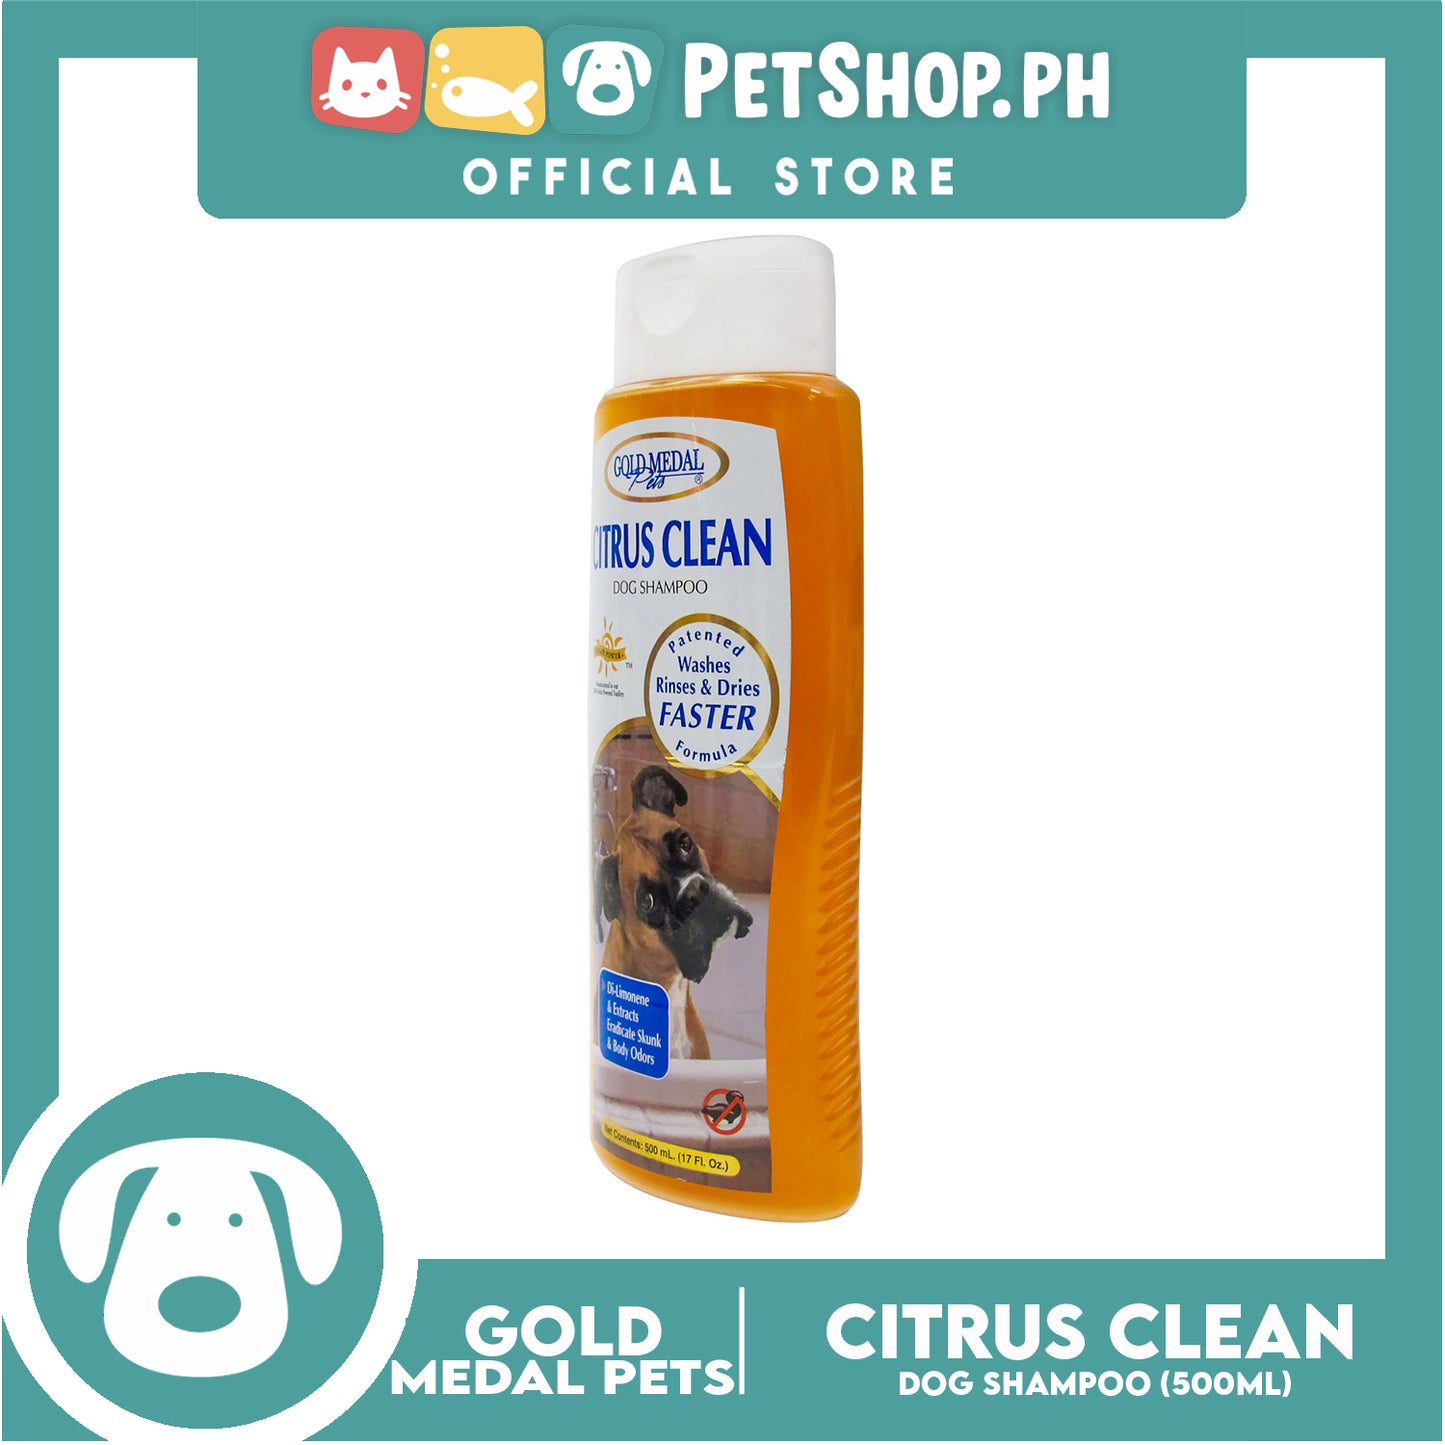 Gold Medal Pets Citrus Clean Dog Shampoo 17oz Di-Limonene and Extracts, Eradicate Skunk and Body Odors